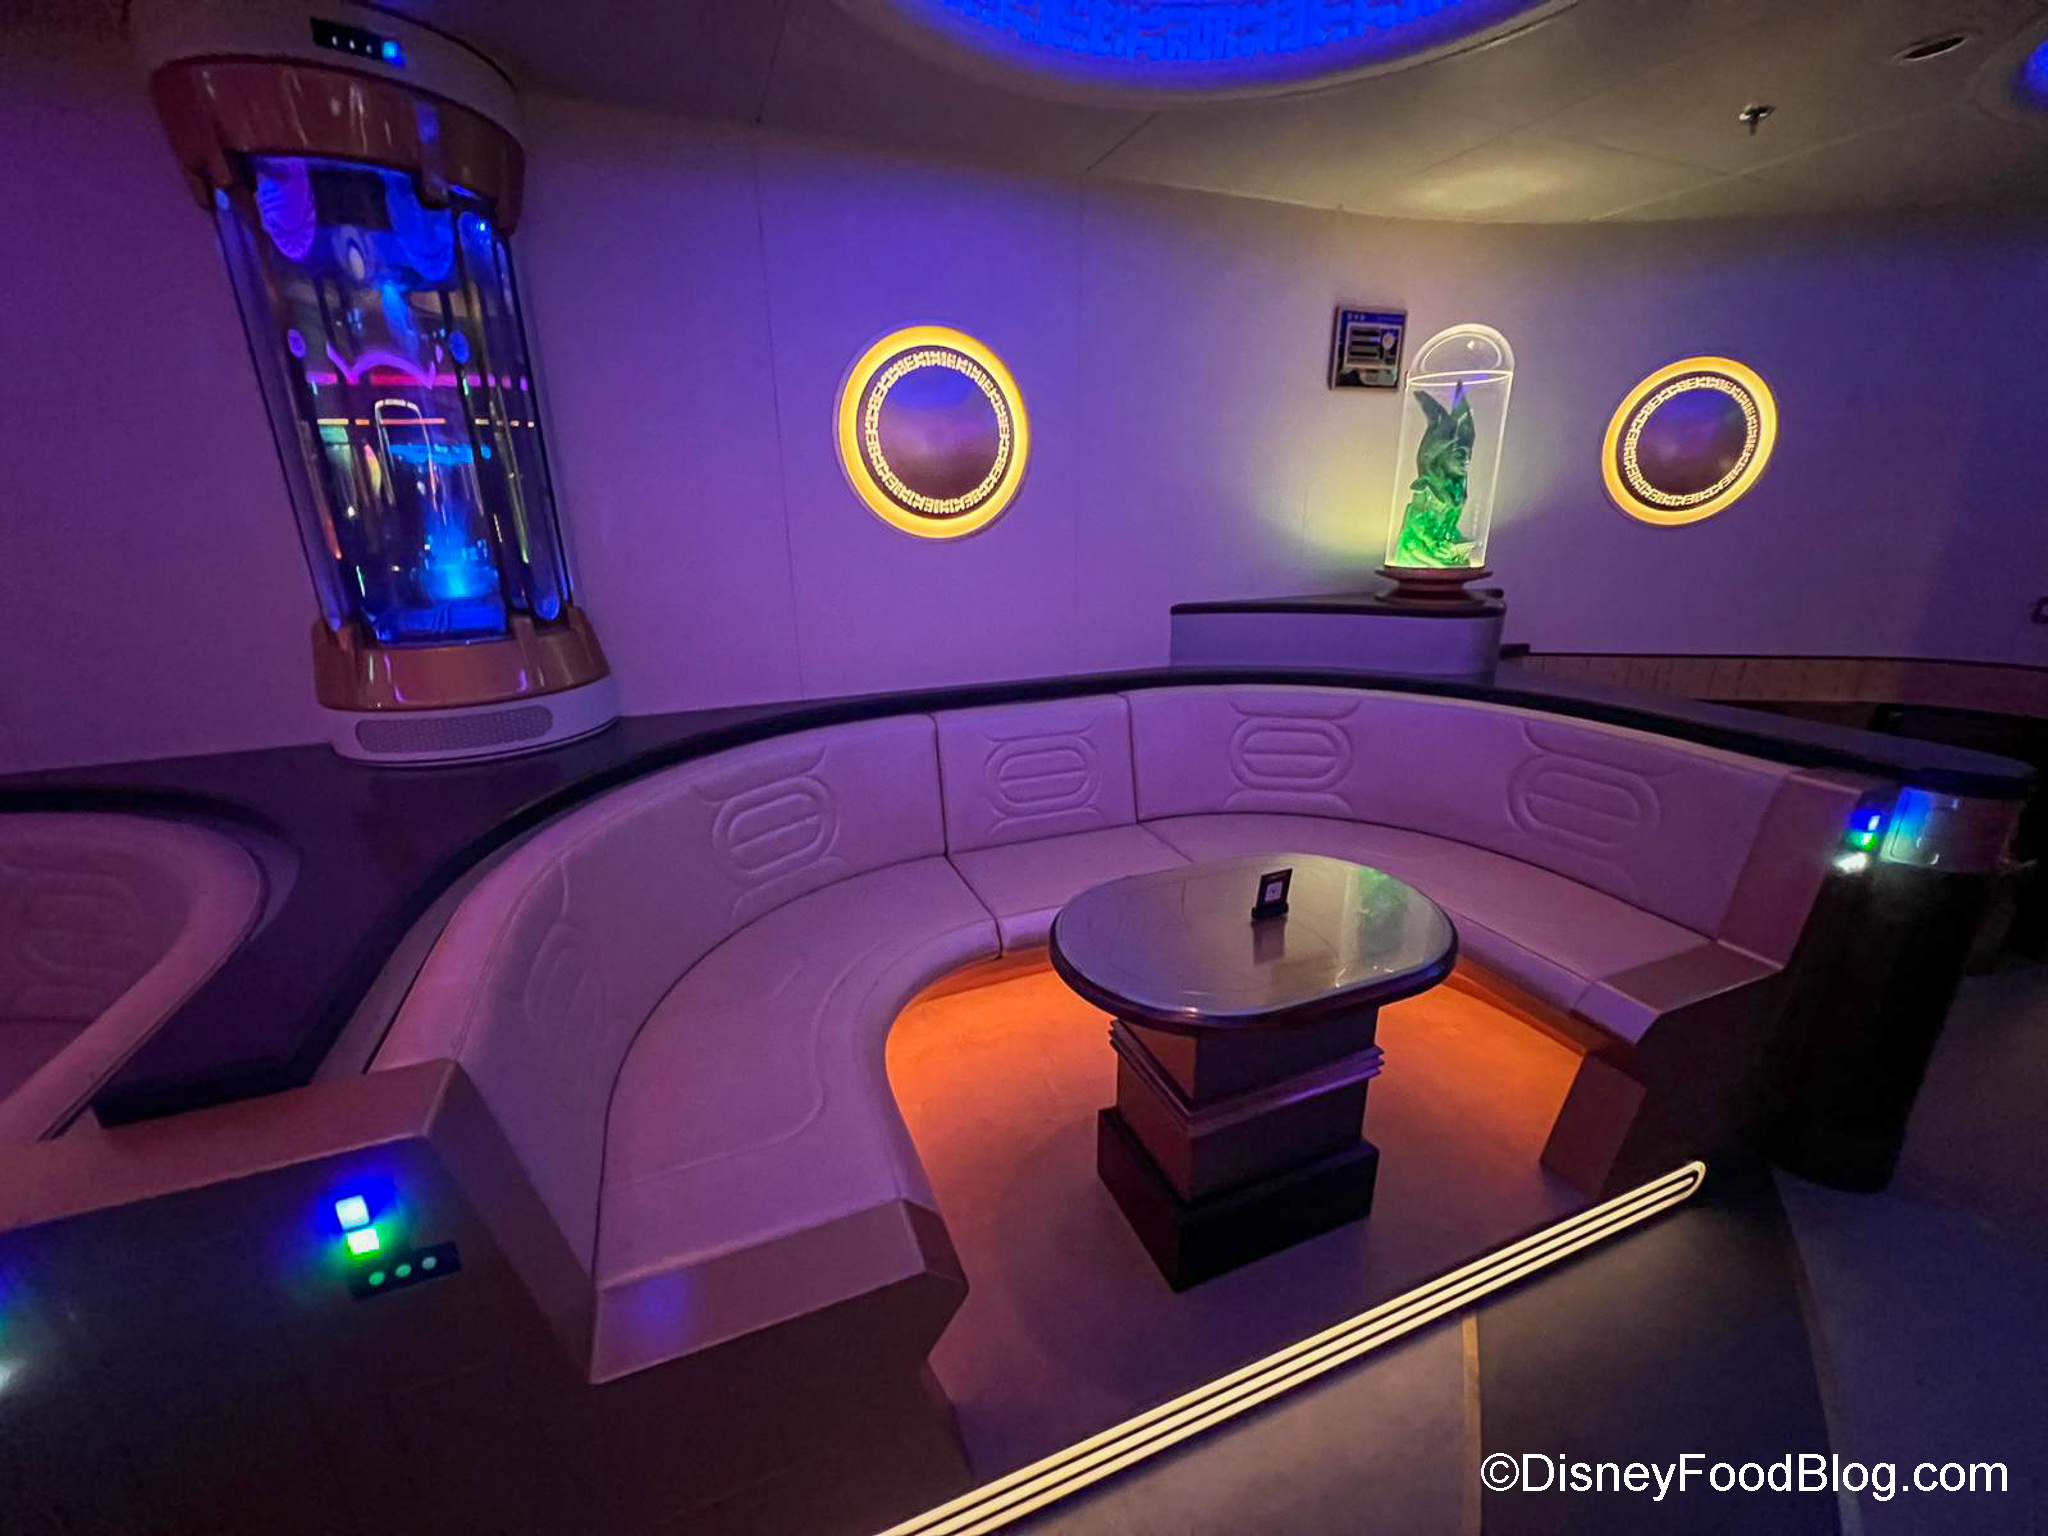 https://www.disneyfoodblog.com/wp-content/uploads/2022/06/2022-port-canaveral-disney-cruise-line-wish-ship-new-star-wars-hyperspace-lounge-atmo-6.jpg